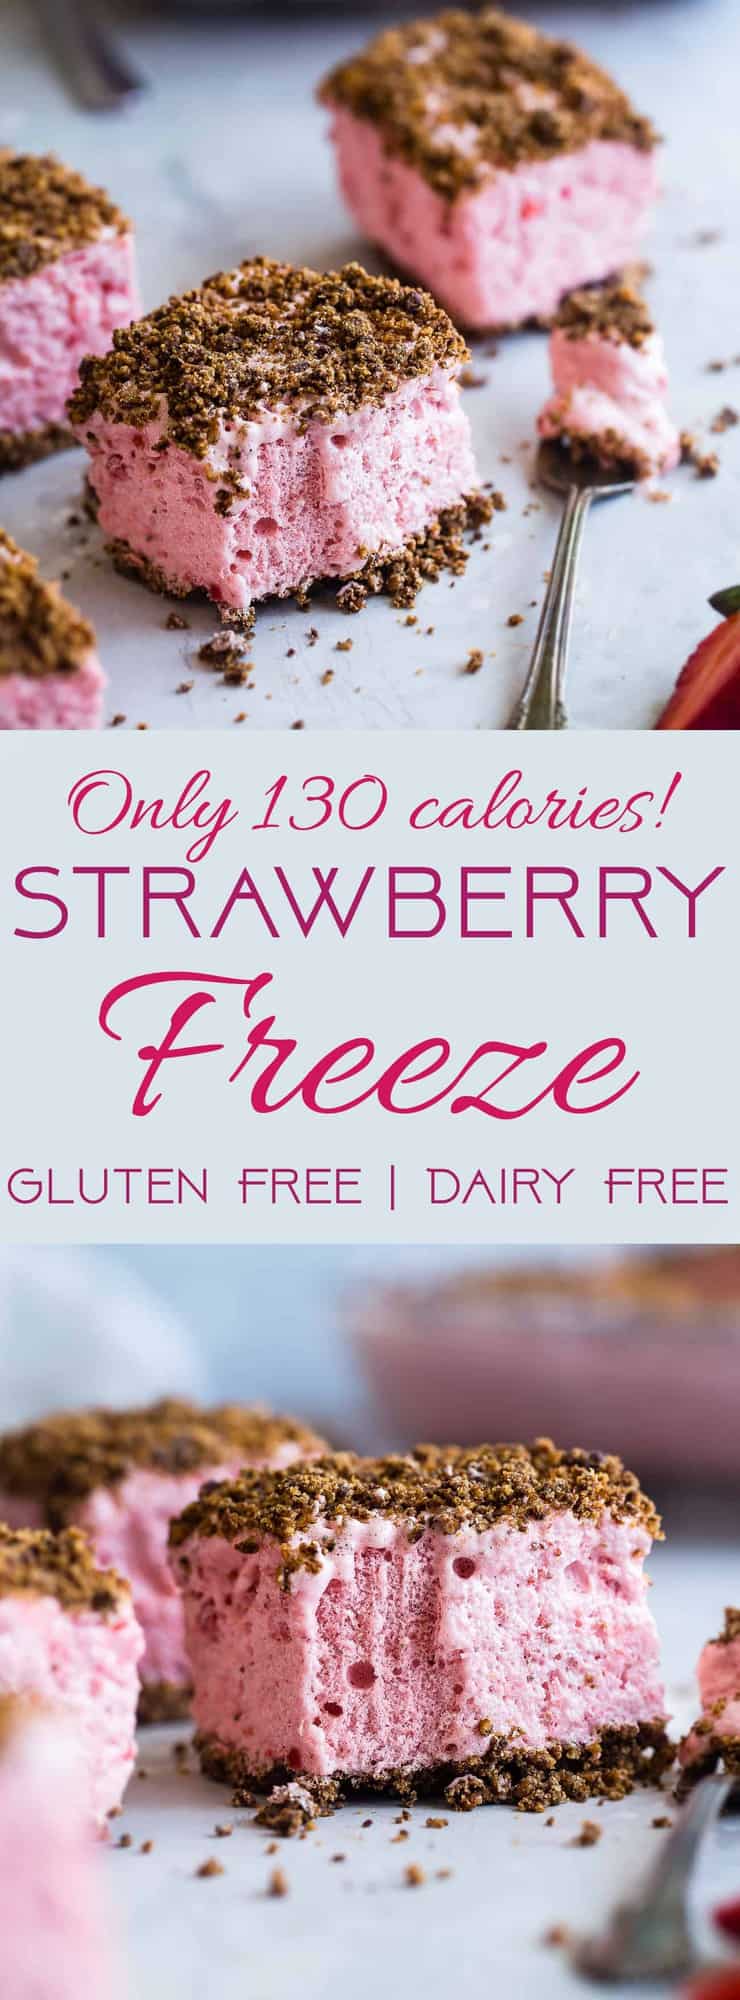 Strawberry Freeze - A low calorie, quick and easy, gluten free healthy Frozen Strawberry Dessert Recipe with a crunchy, pecan crumble! Always a hit with kids and adults and everyone always wants the recipe! | #Foodfaithfitness | #Glutenfree #Dairyfree #Healthy #Strawberries #Dessert